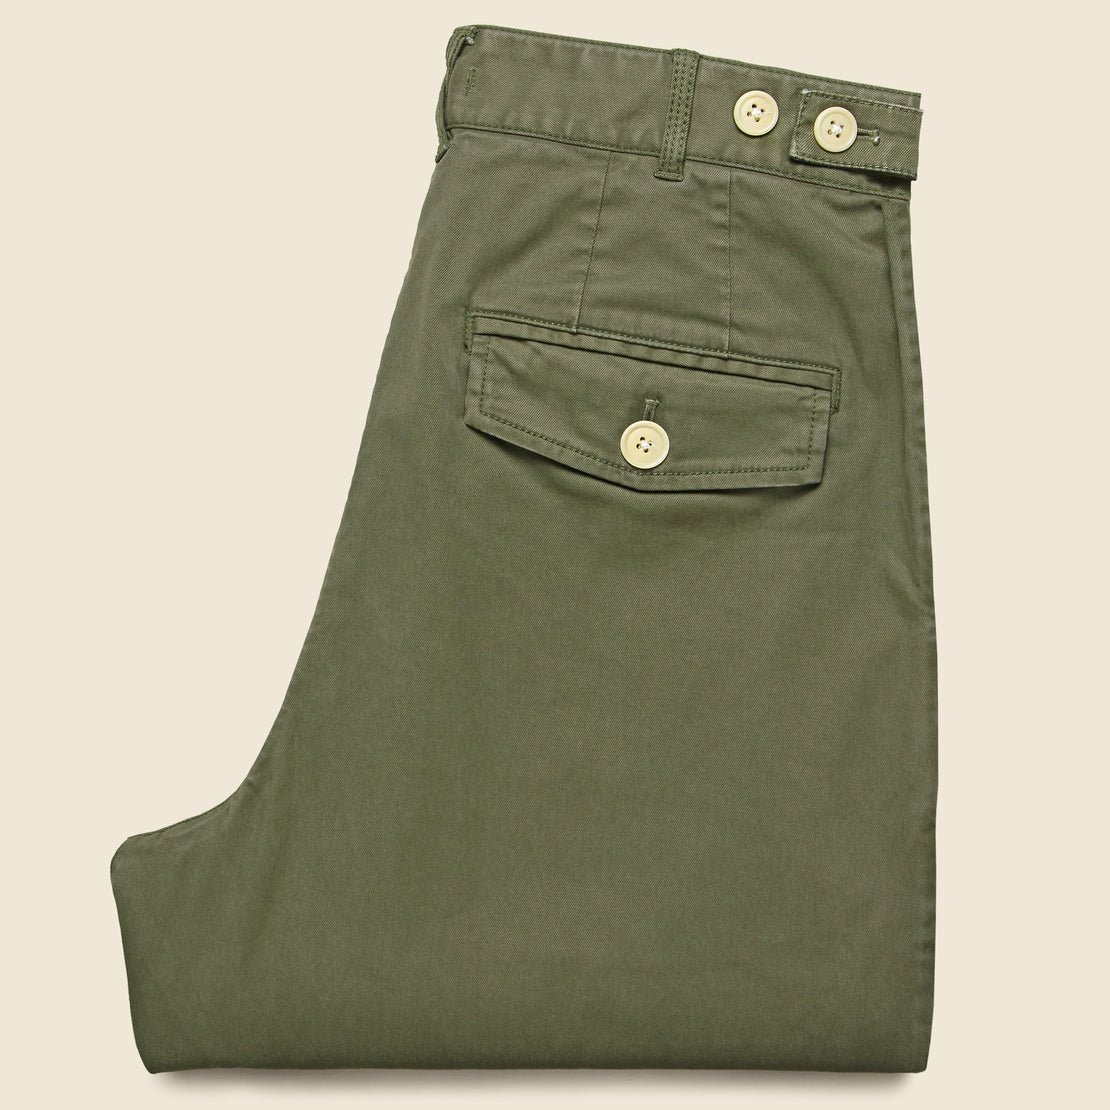 Flat Front Chino - Military Olive - Alex Mill - STAG Provisions - Pants - Twill